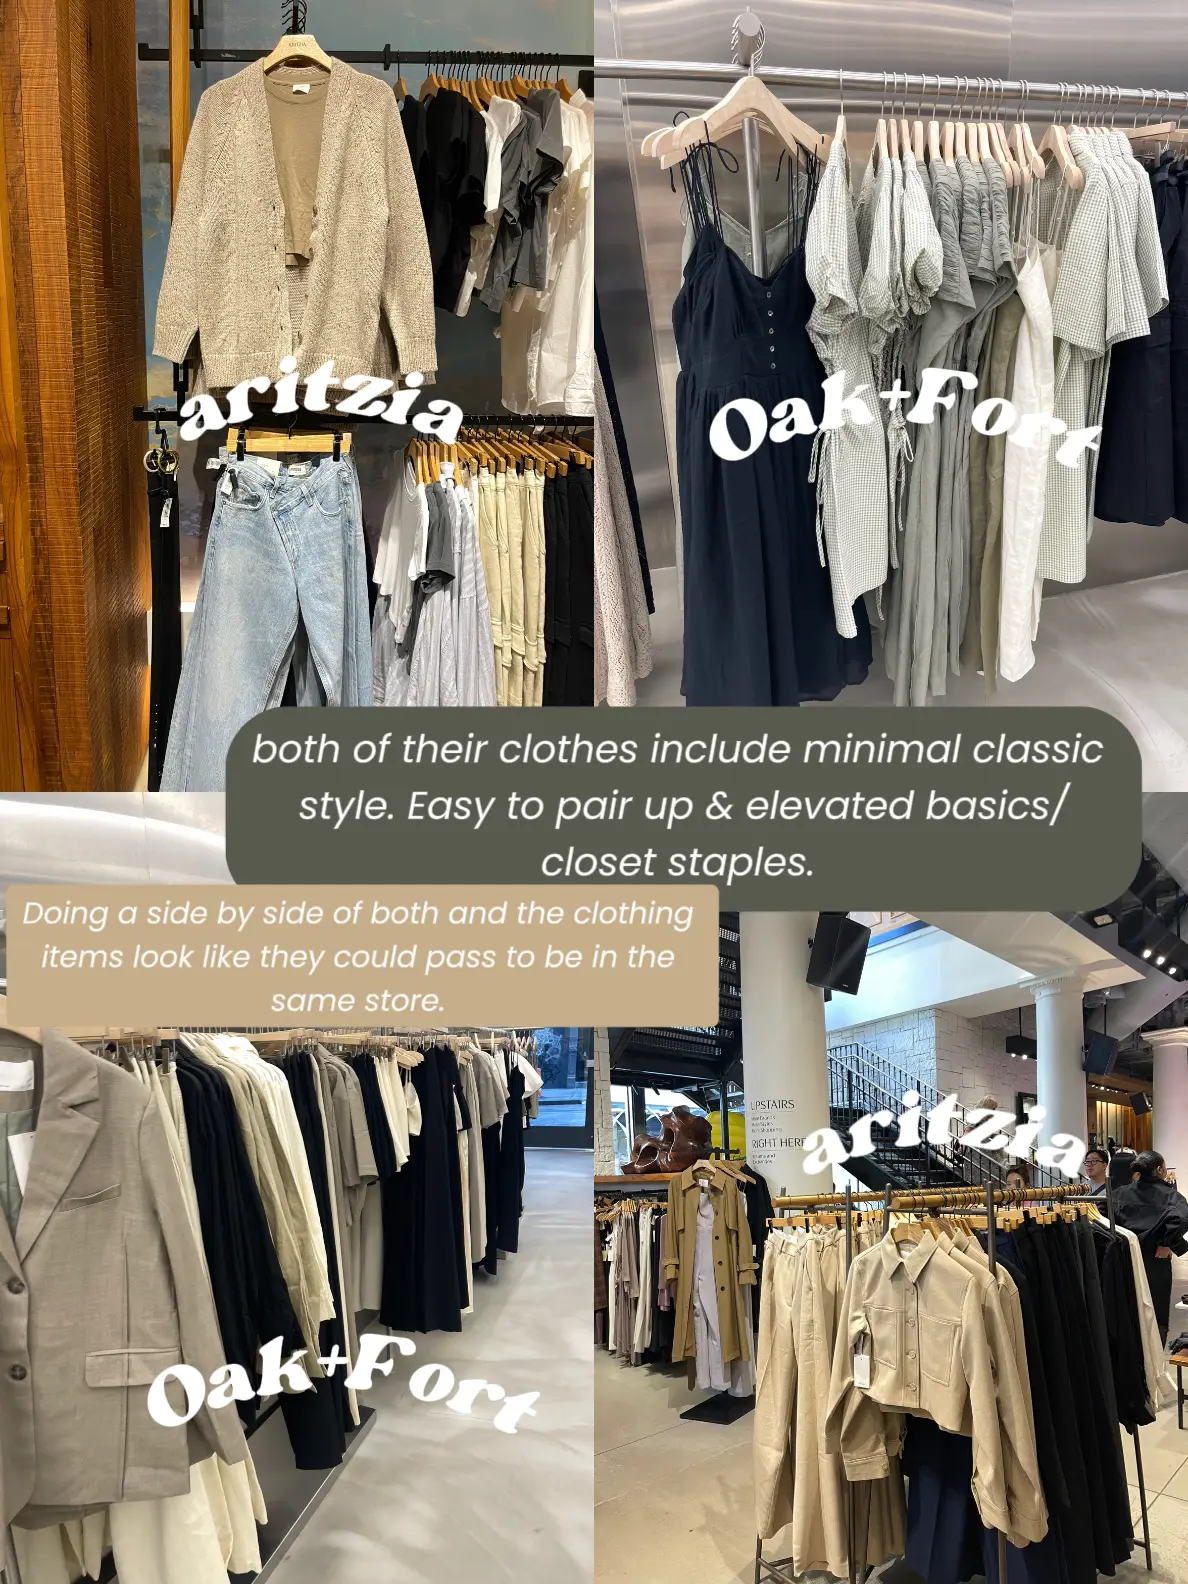 Affordable Summer Aritzia Clothing Look a Likes from